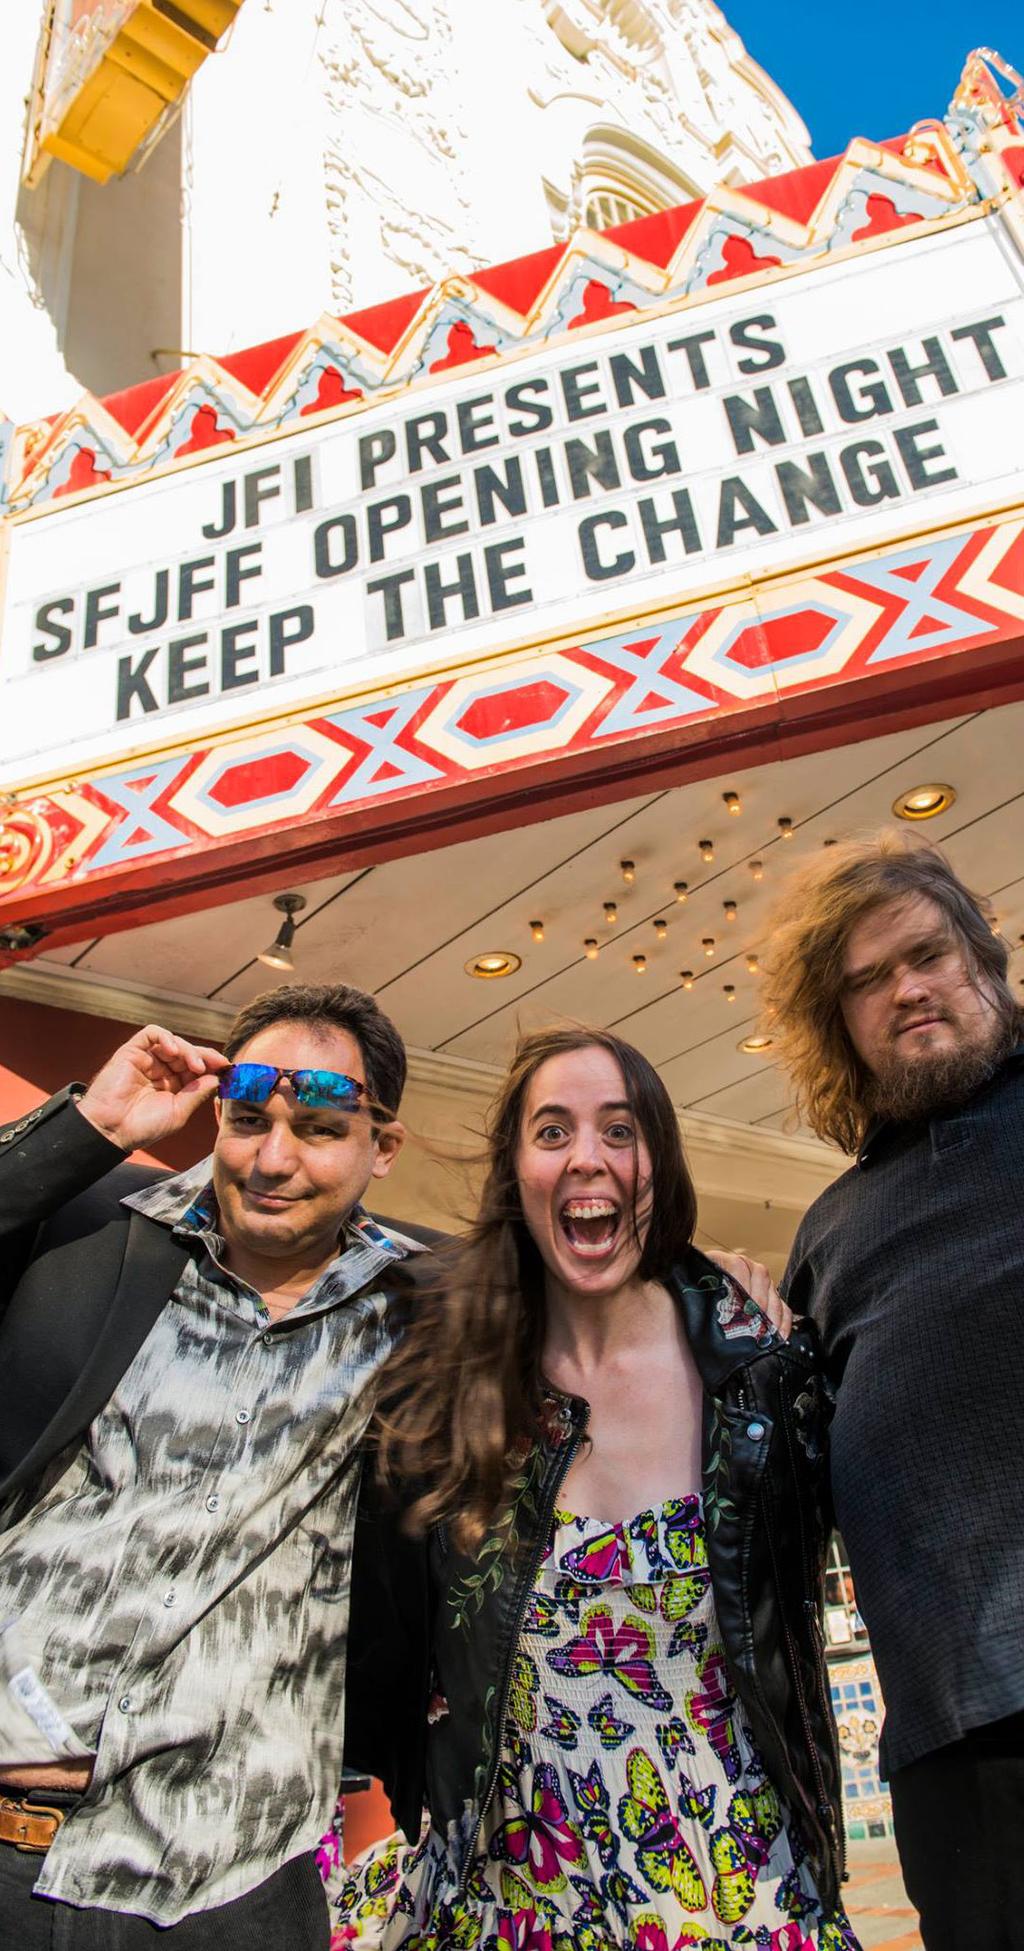 the power of jewish cinema The Jewish Film Institute s mission is to inspire communities in San Francisco and around the world to expand their understanding of Jewish life through film, media, and